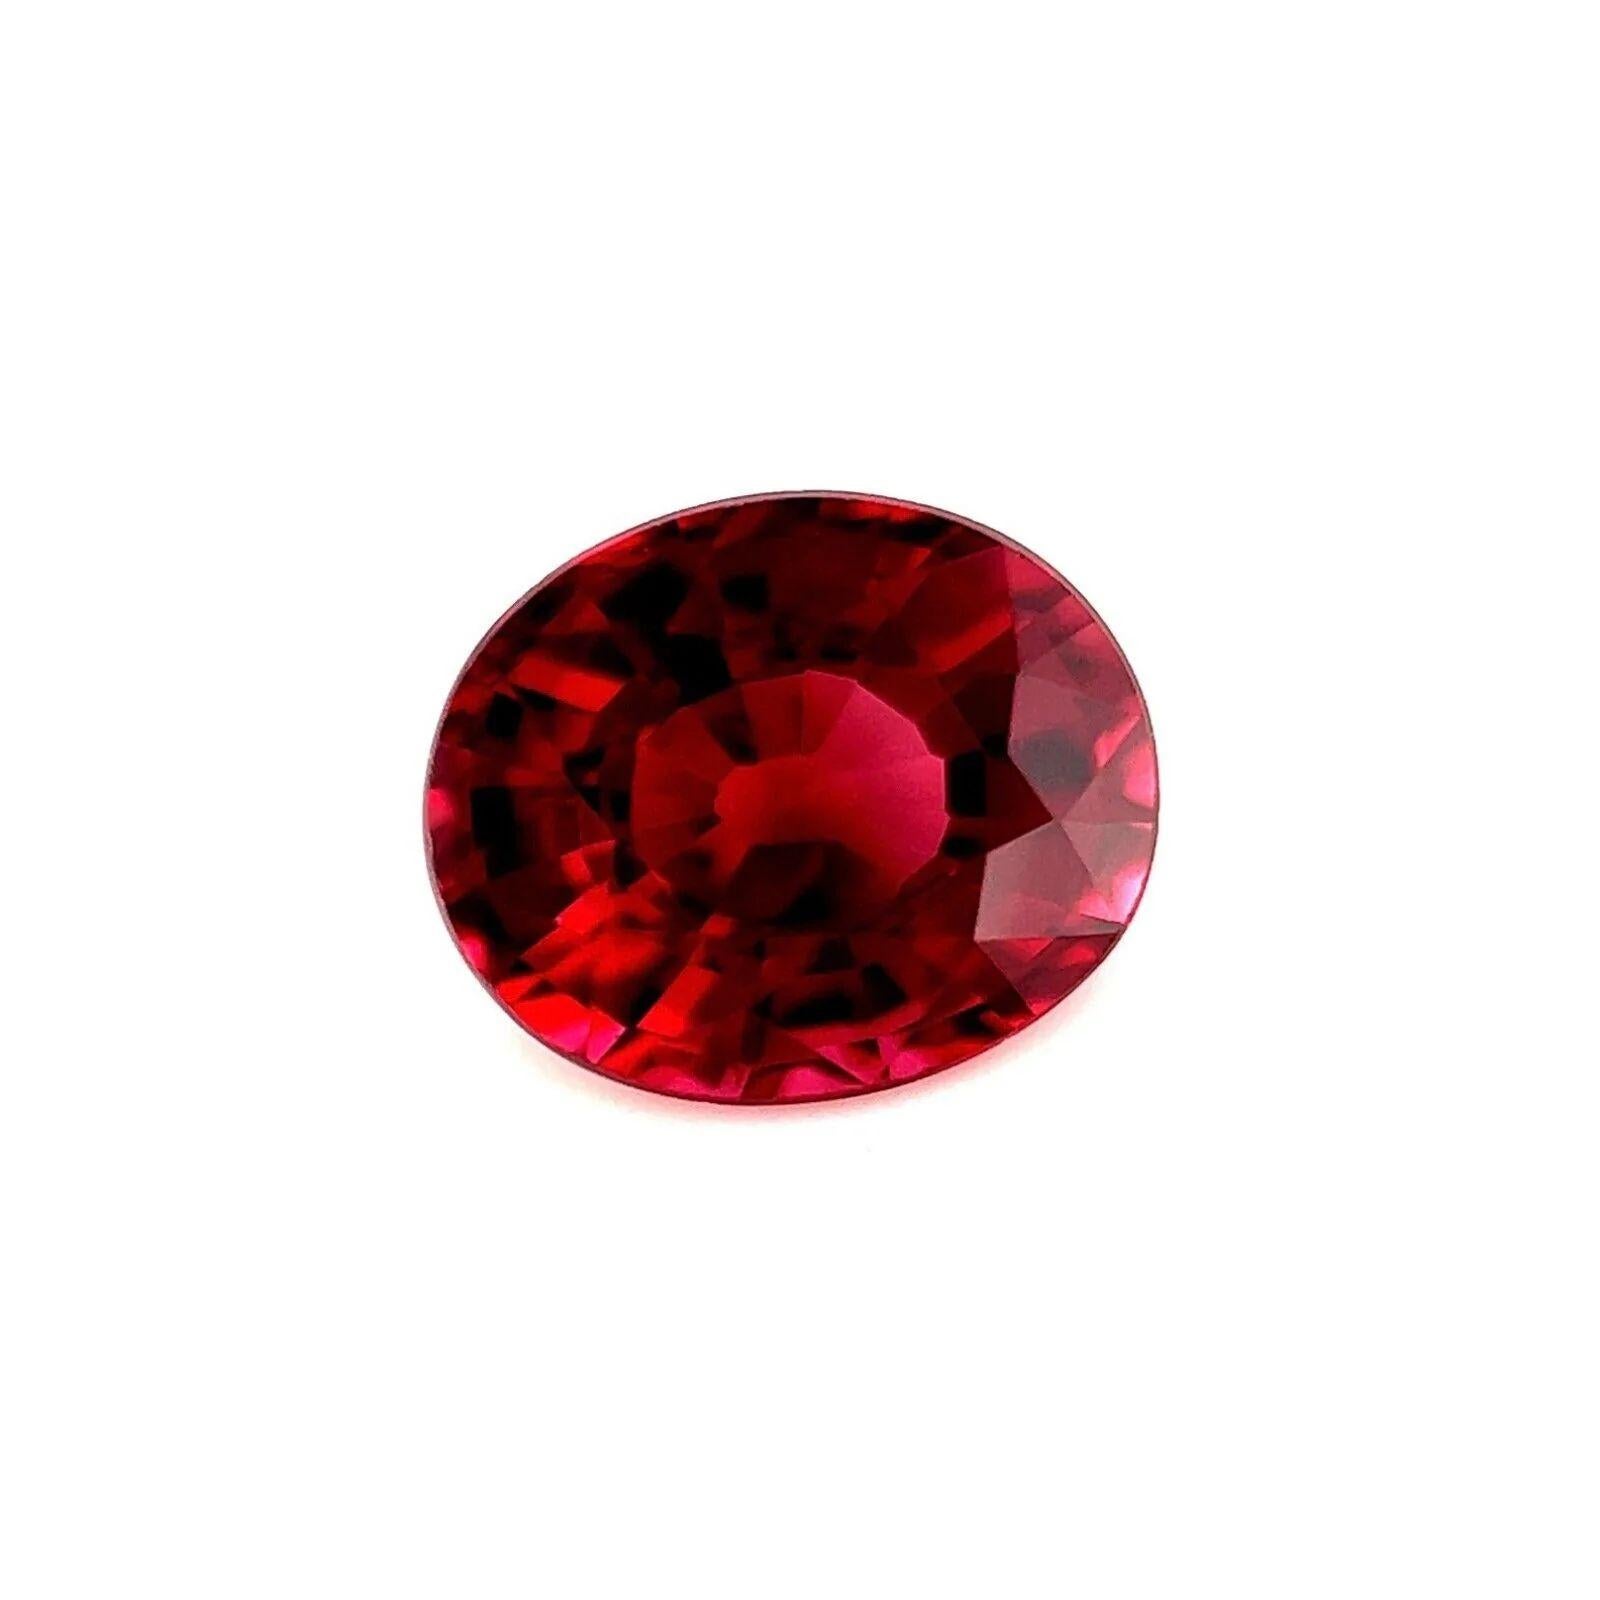 Fine 1.80 Vivid Pink Purple Rhodolite Garnet Oval Cut Loose Gem 7.7x6.3mm VVS

Fine Loose Rhodolite Garnet Gemstone.
1.80 Carat with a beautiful vivid pink purple colour and excellent clarity, very clean gemstone, VVS.
Also has an excellent oval cut